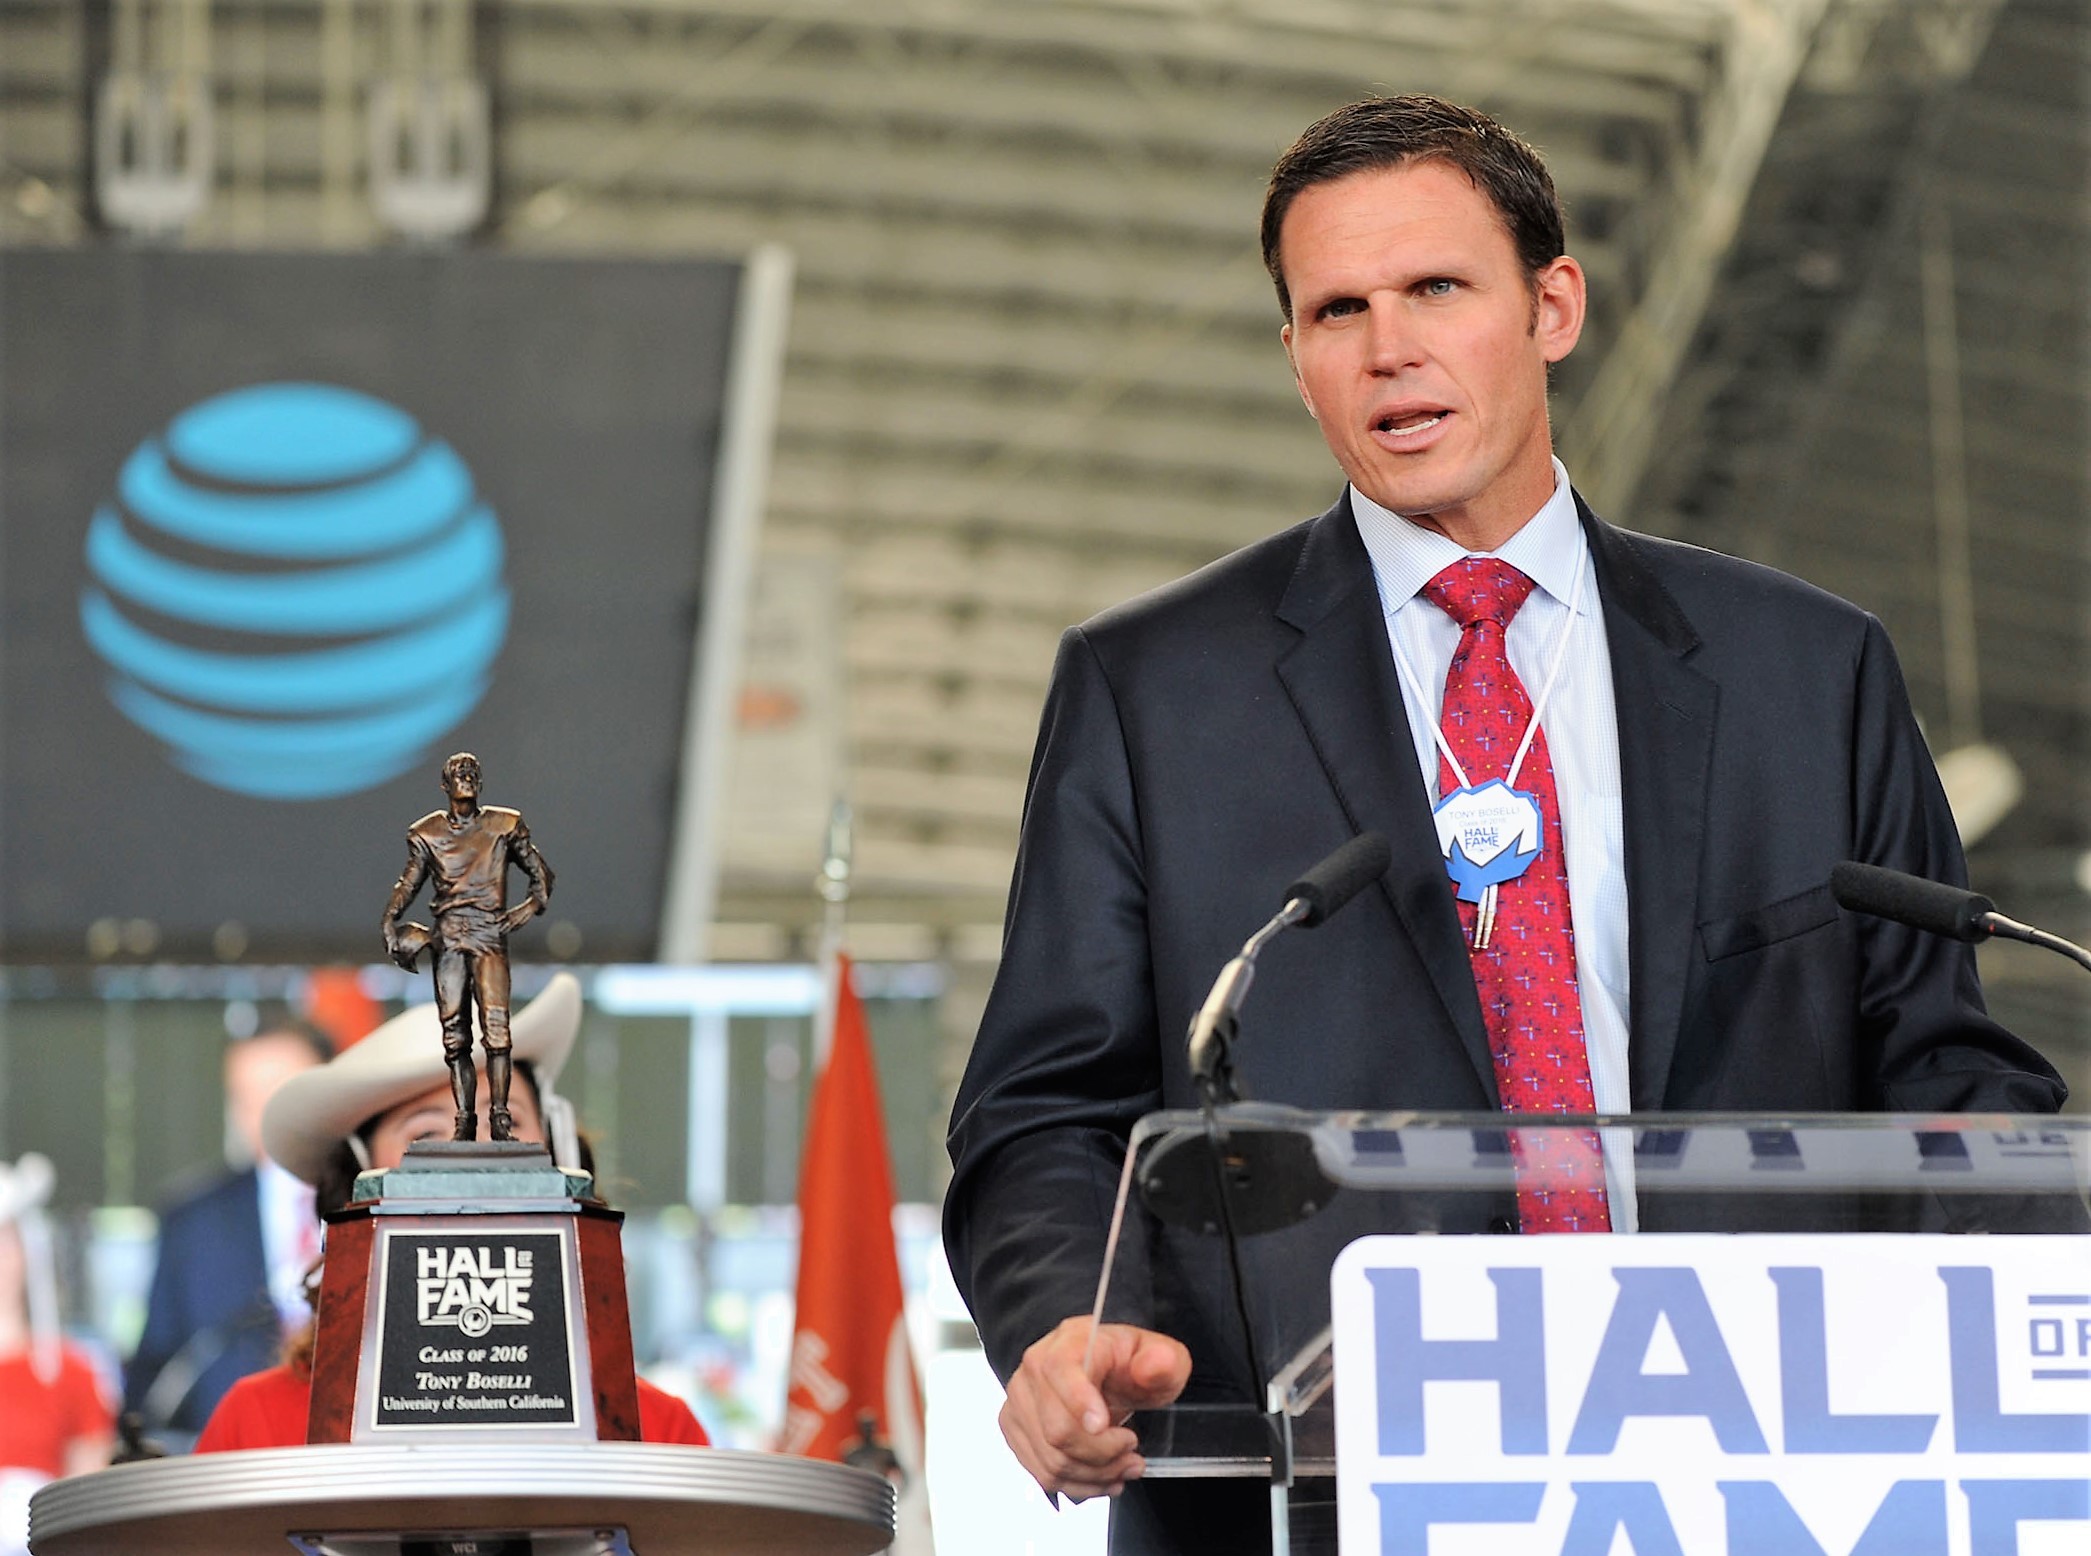 Former USC and Jaguars offensive tackle Tony Boselli accepts his award recognizing his induction into the Cotton Bowl Hall of Fame. Photo by Ian Halperin/CBAA